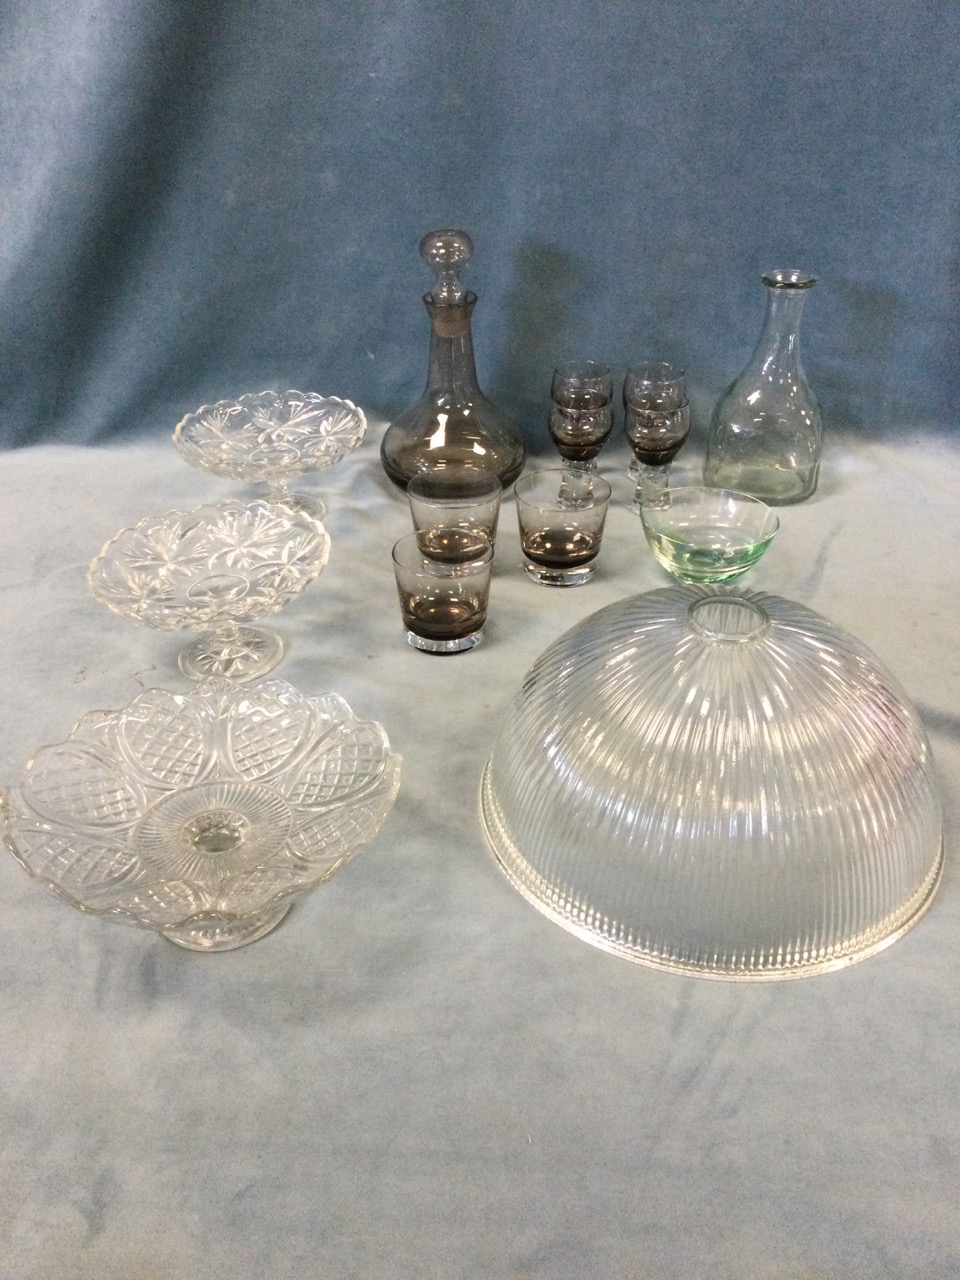 Miscellaneous glass including a fluted lampshade, a smoked glass decanter & glasses set, a pair of